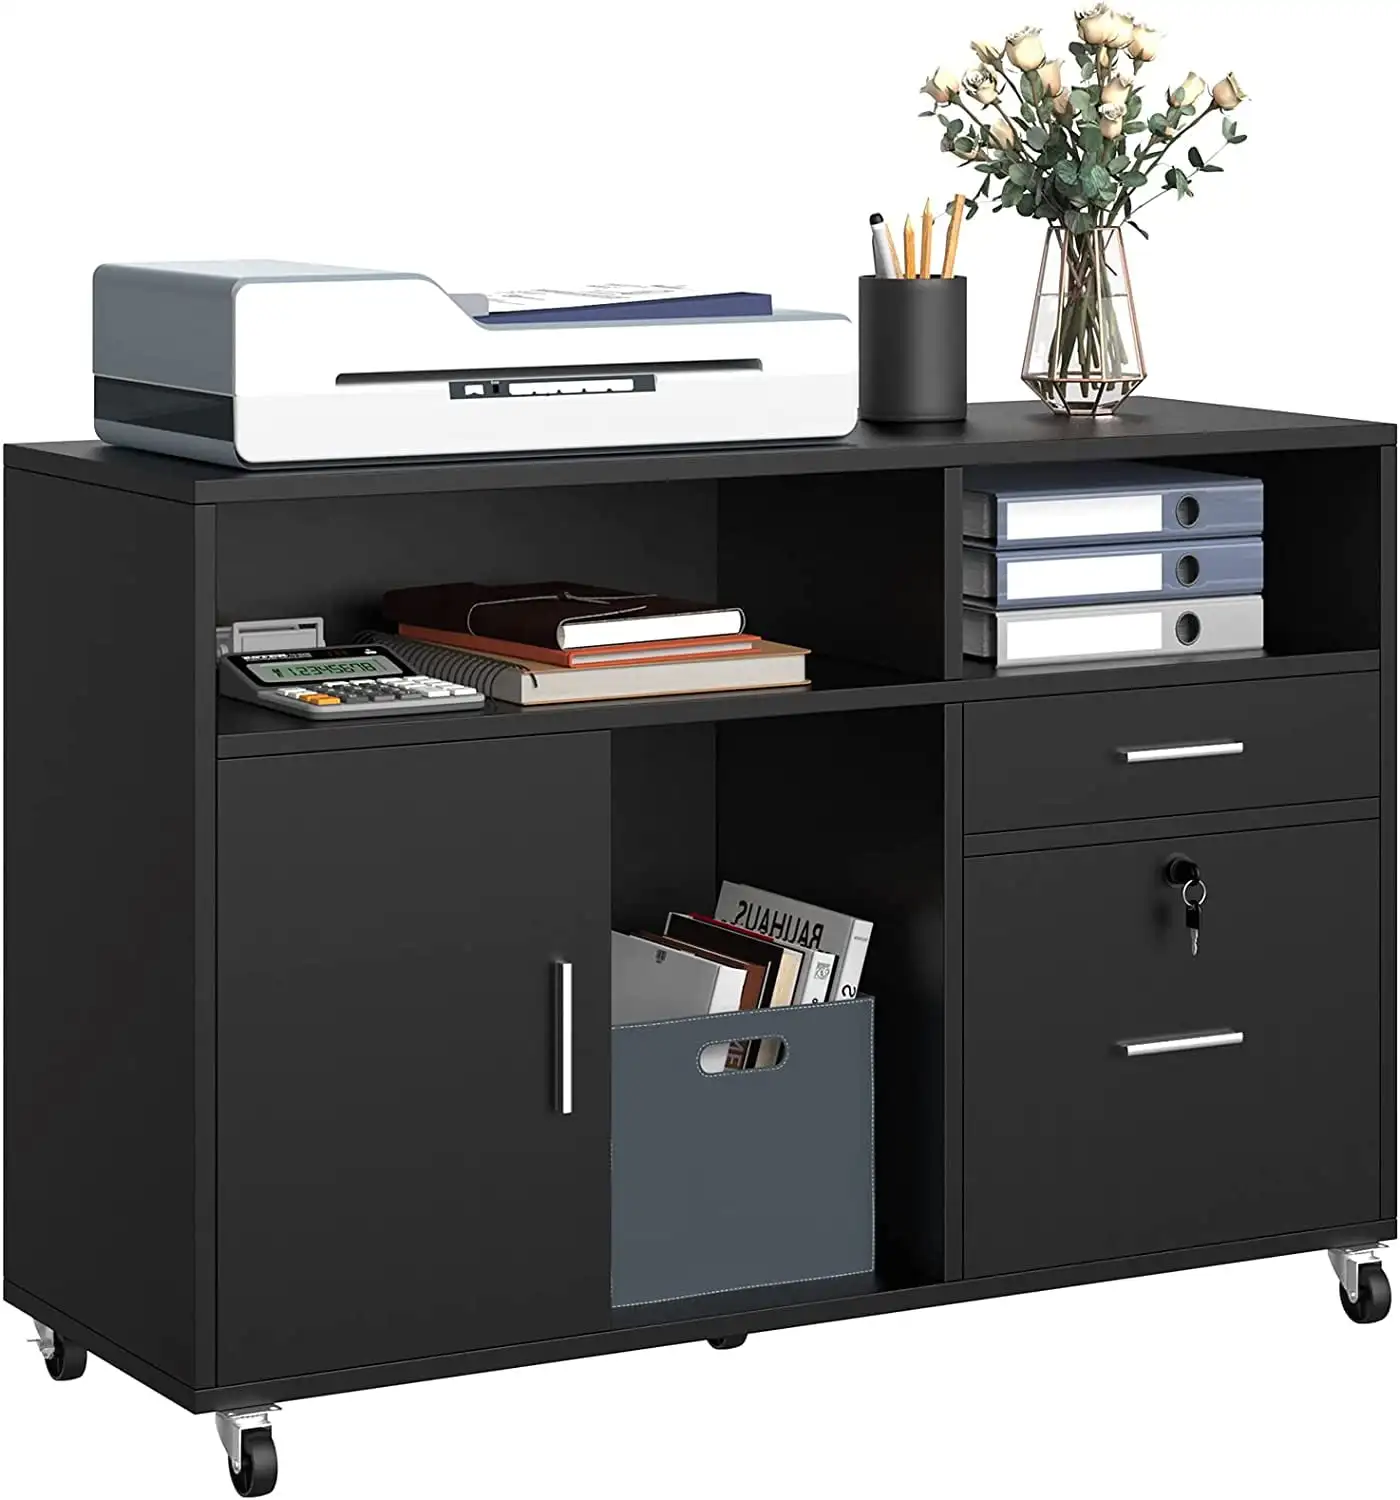 

Dextrus 2 Drawer Wood Lateral File Cabinet, Mobile Filing Cabinet Fits A4 Letter Size Files Printer Stand with Open Shelves